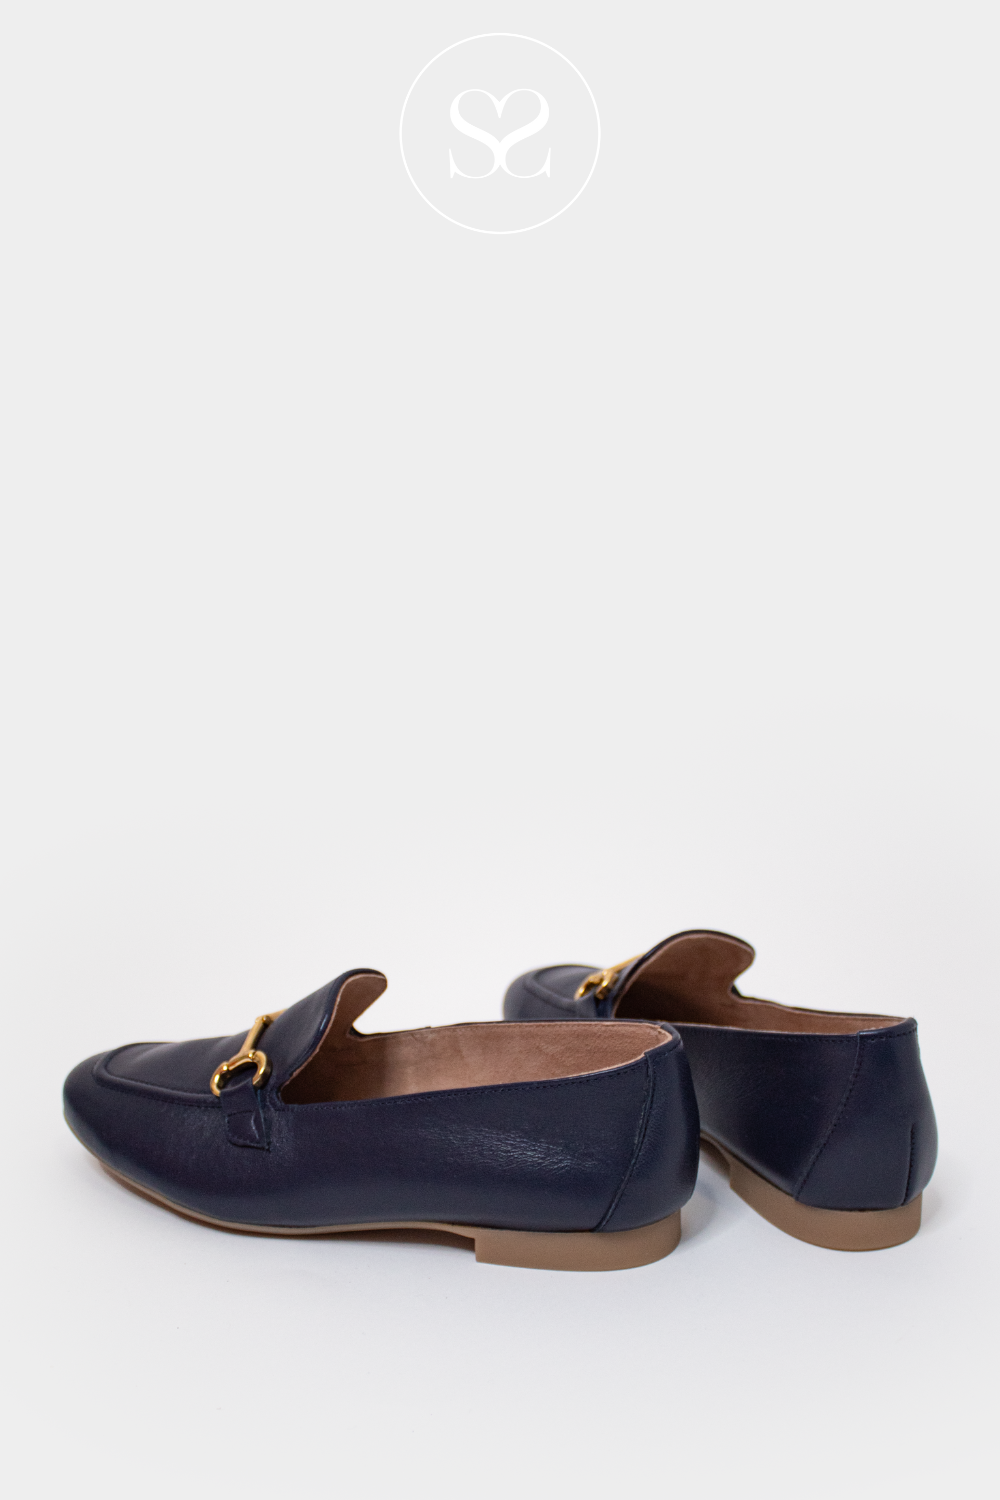 PAUL GREEN 2596 NAVY LEATHER LOAFERS